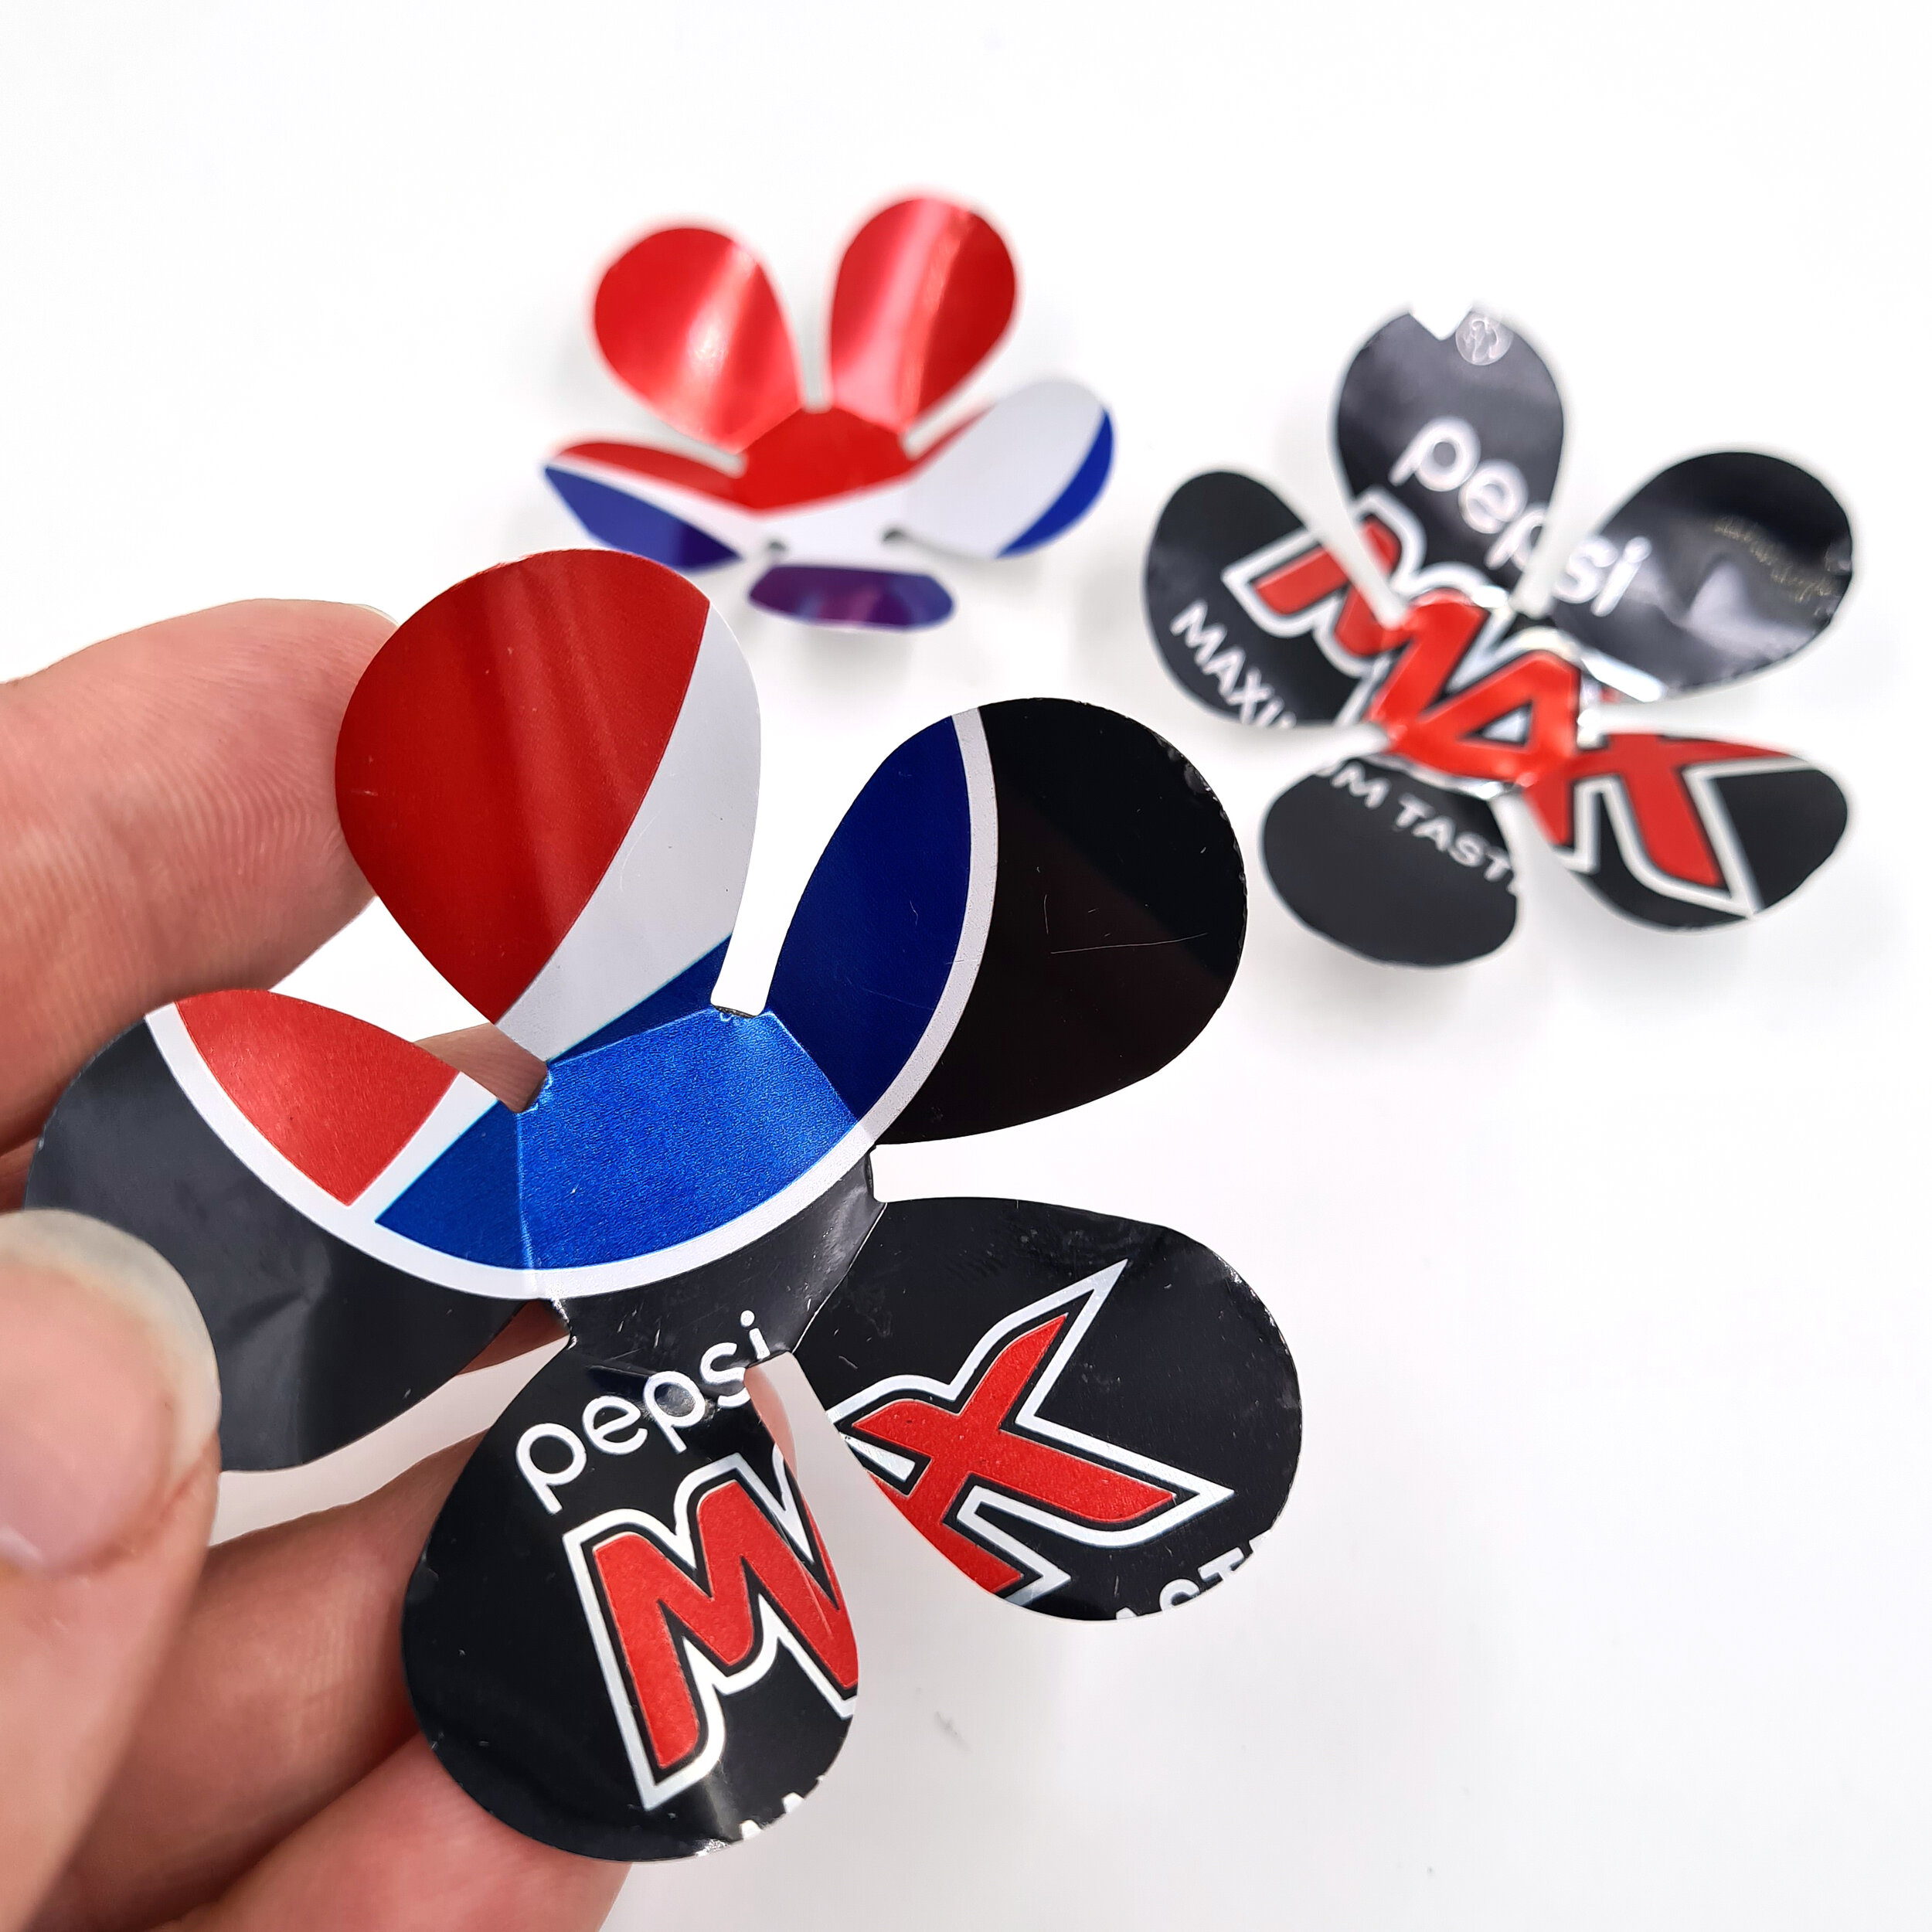 Red and blue creative eco design Pepsi Max Can Flower Magnets holding 